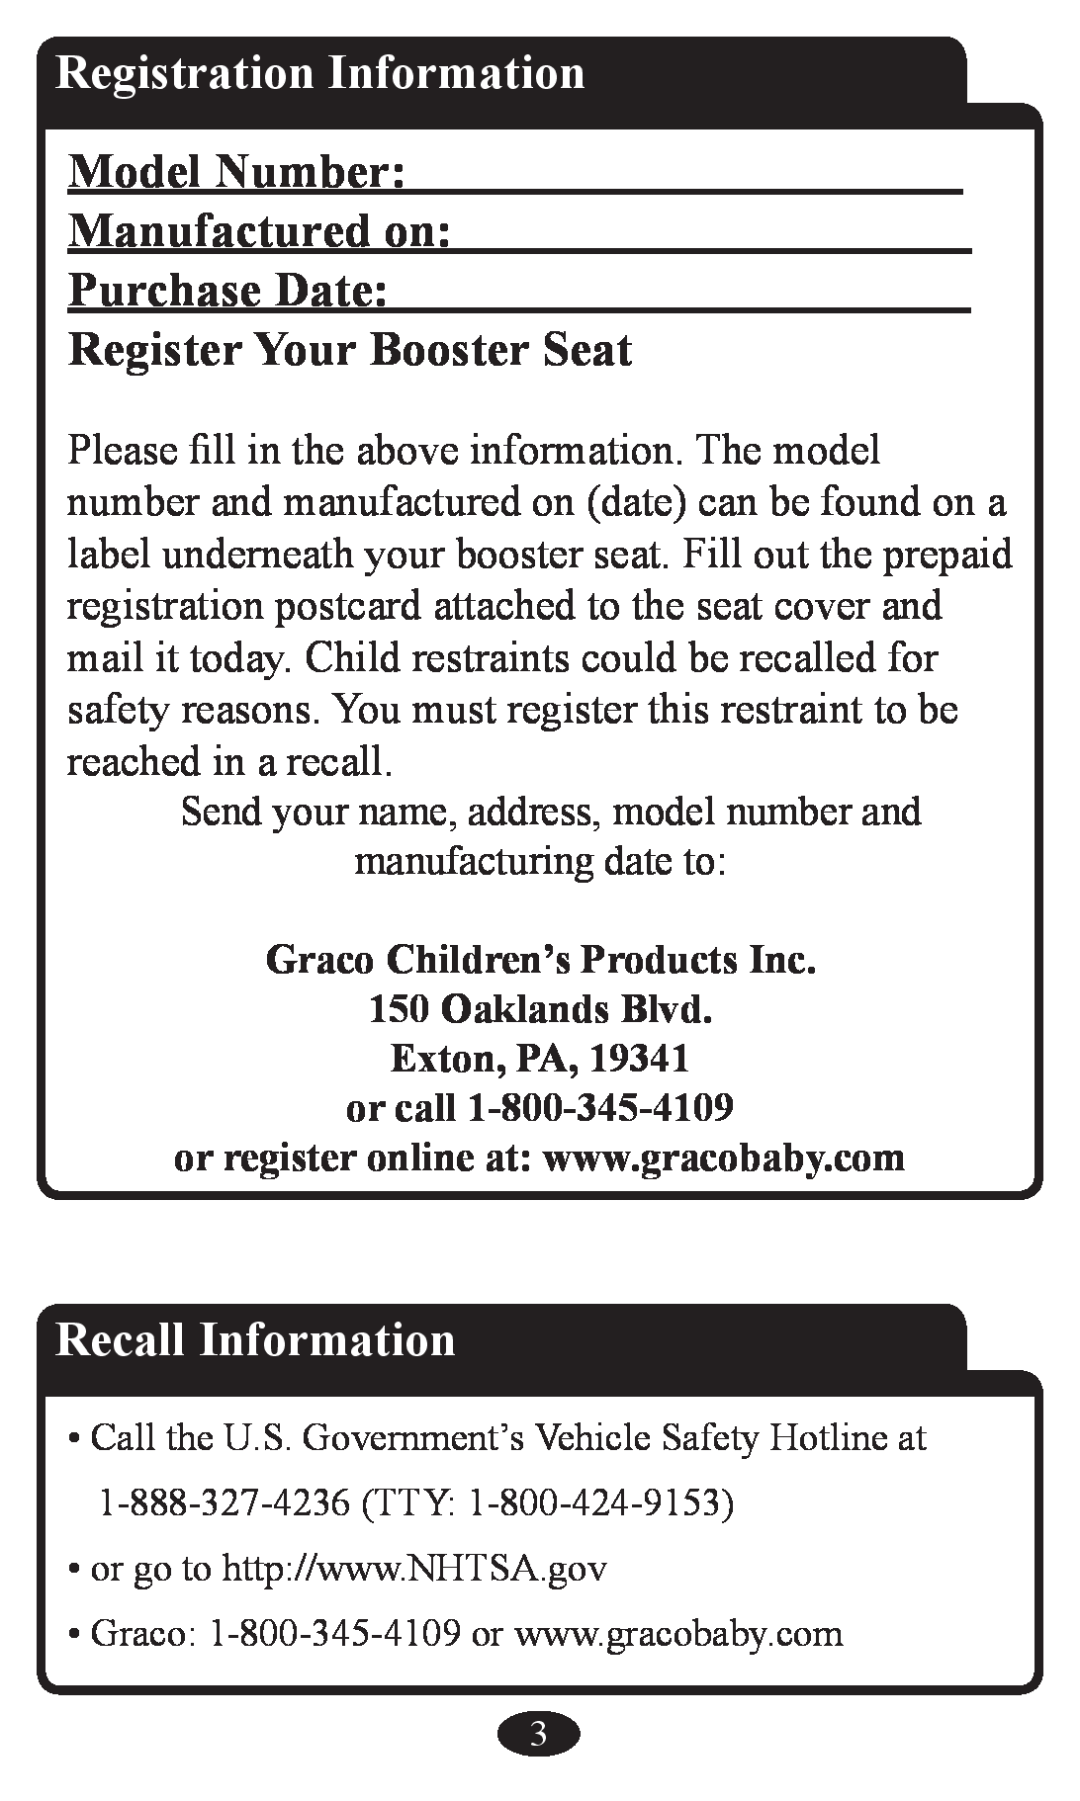 Graco owner manual Registration Information, Model Number Manufactured on Purchase Date Register Your Booster Seat 